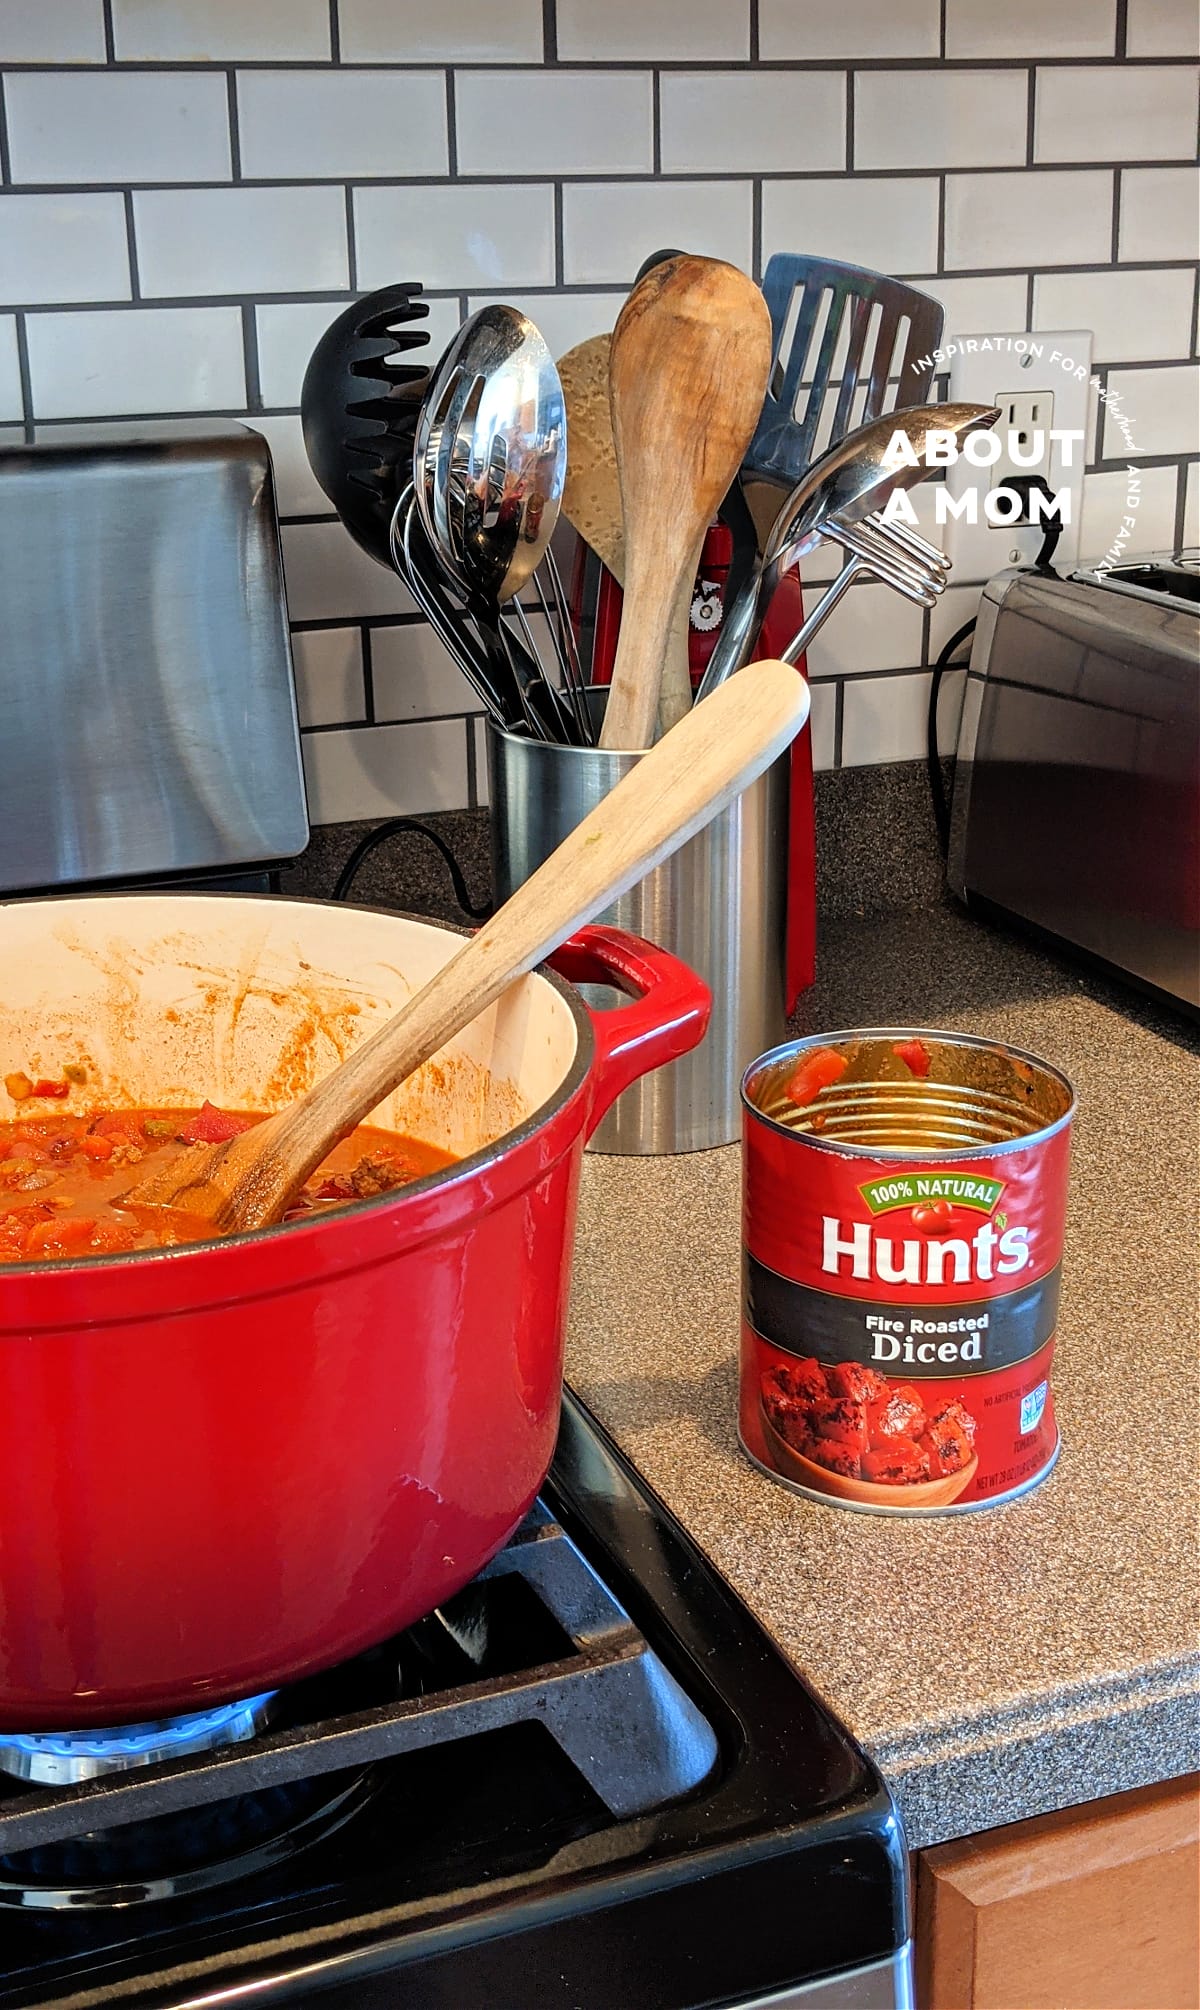 Chili made with Hunt's Fire Roasted Diced Tomatoes tops the list for Fall Food Favorites in 2021.